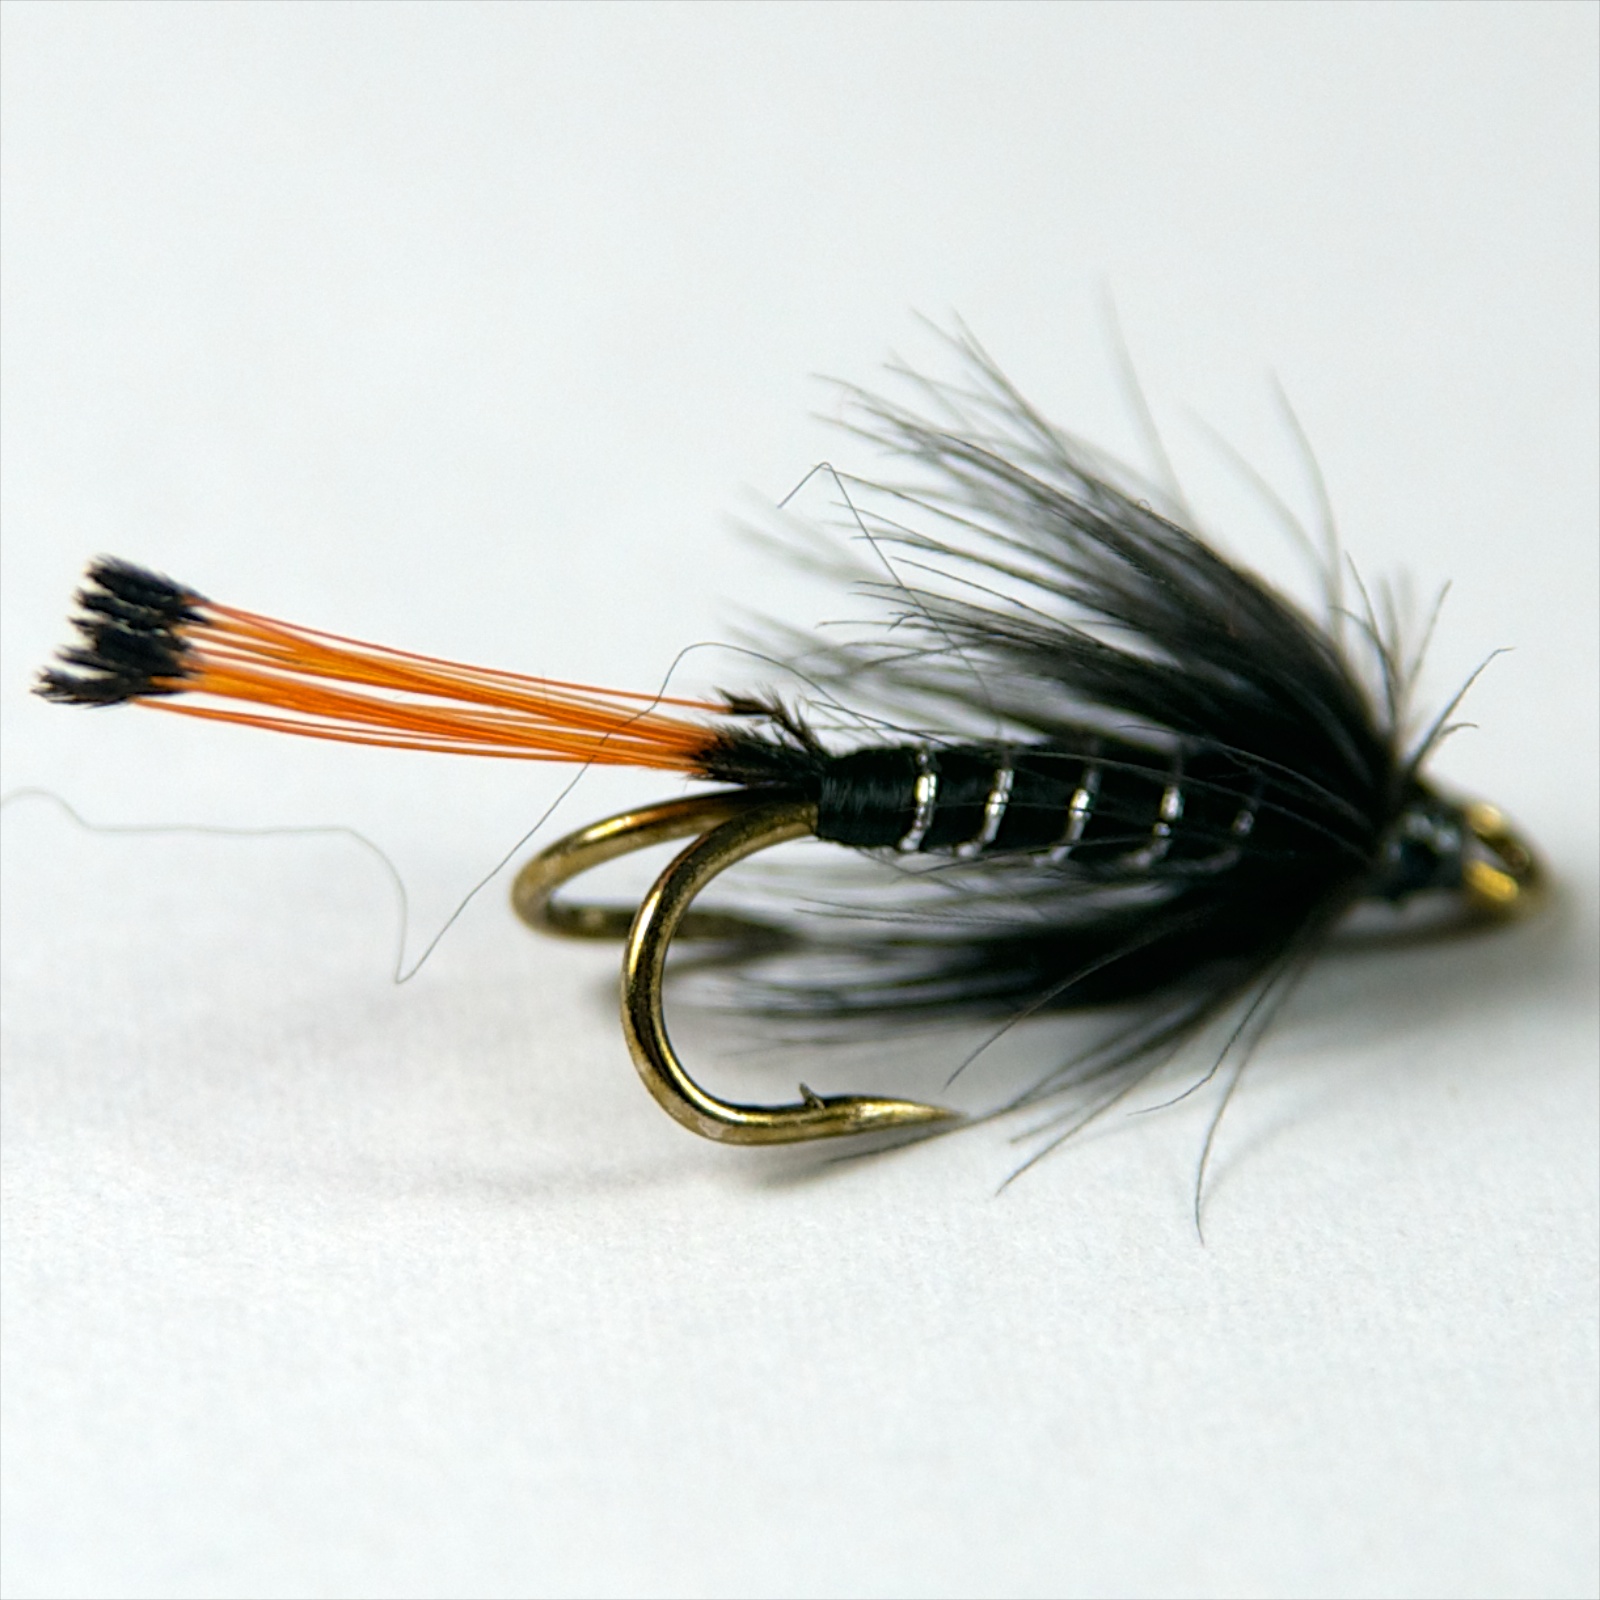 6 DOOBRY Wet Trout Fly Fishing Flies size options by Dragonflies 